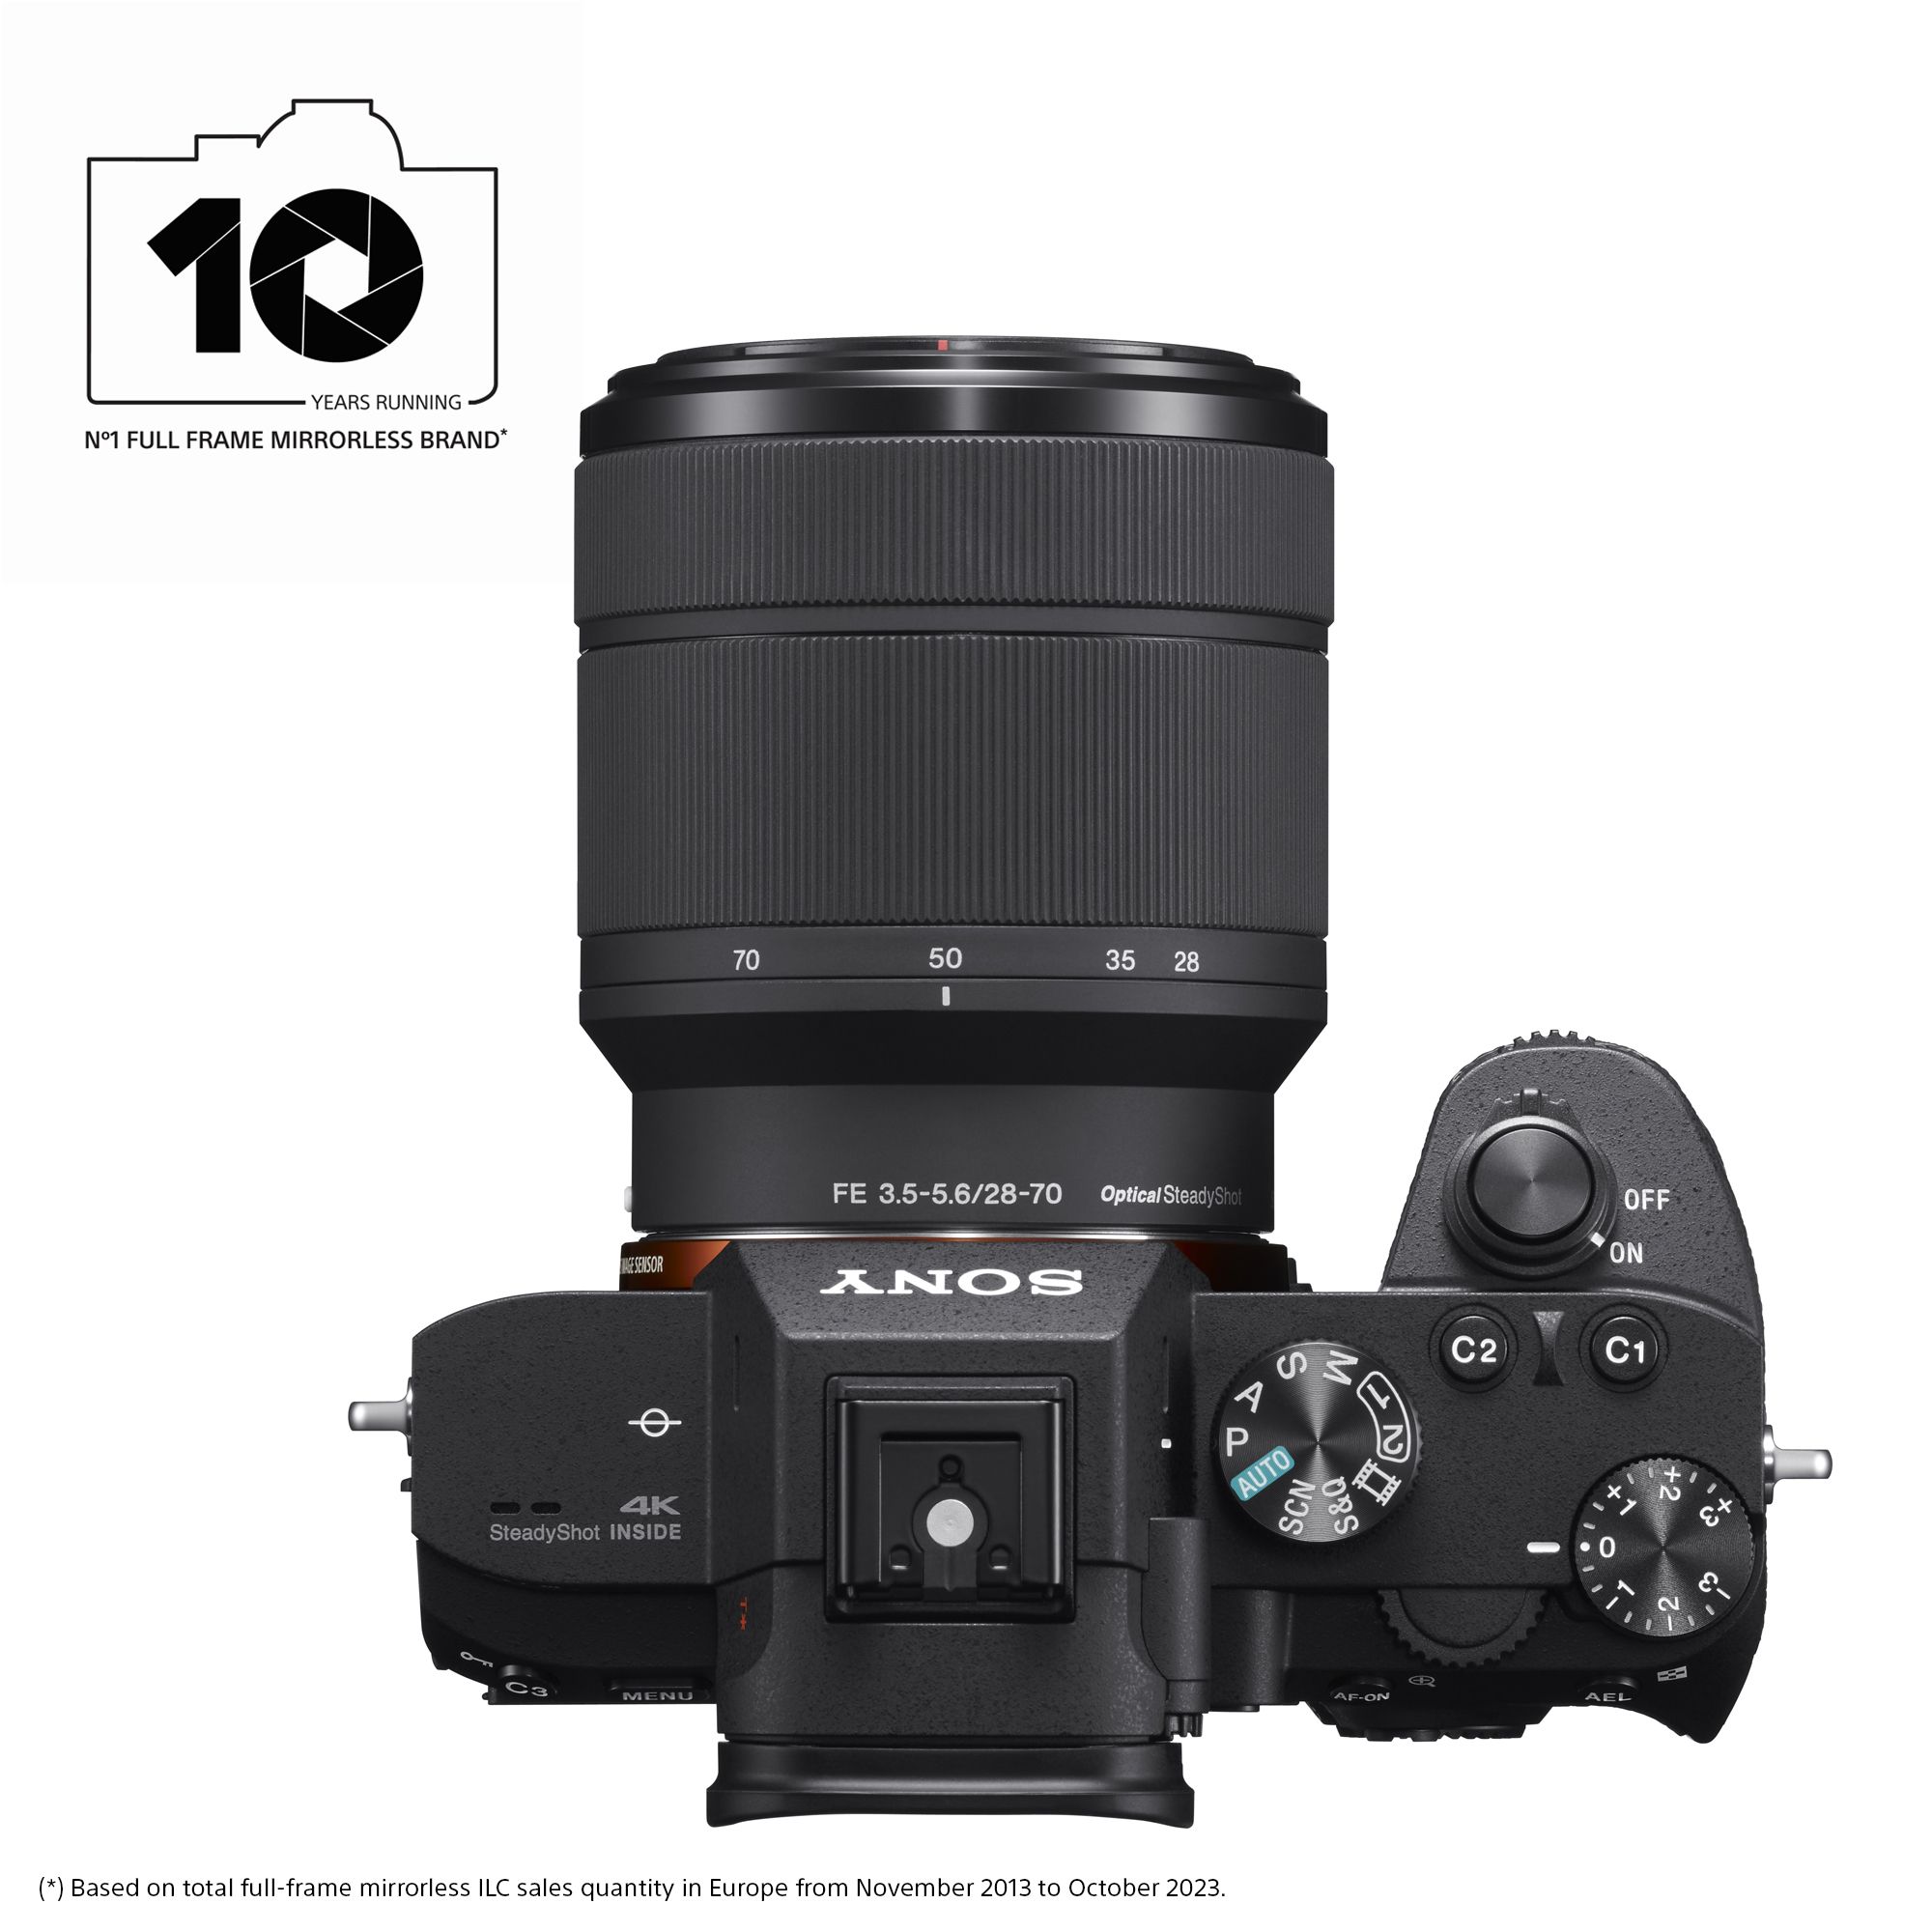 Sony Alpha a7 III Mirrorless [Video] Camera with FE 28-70 mm F3.5